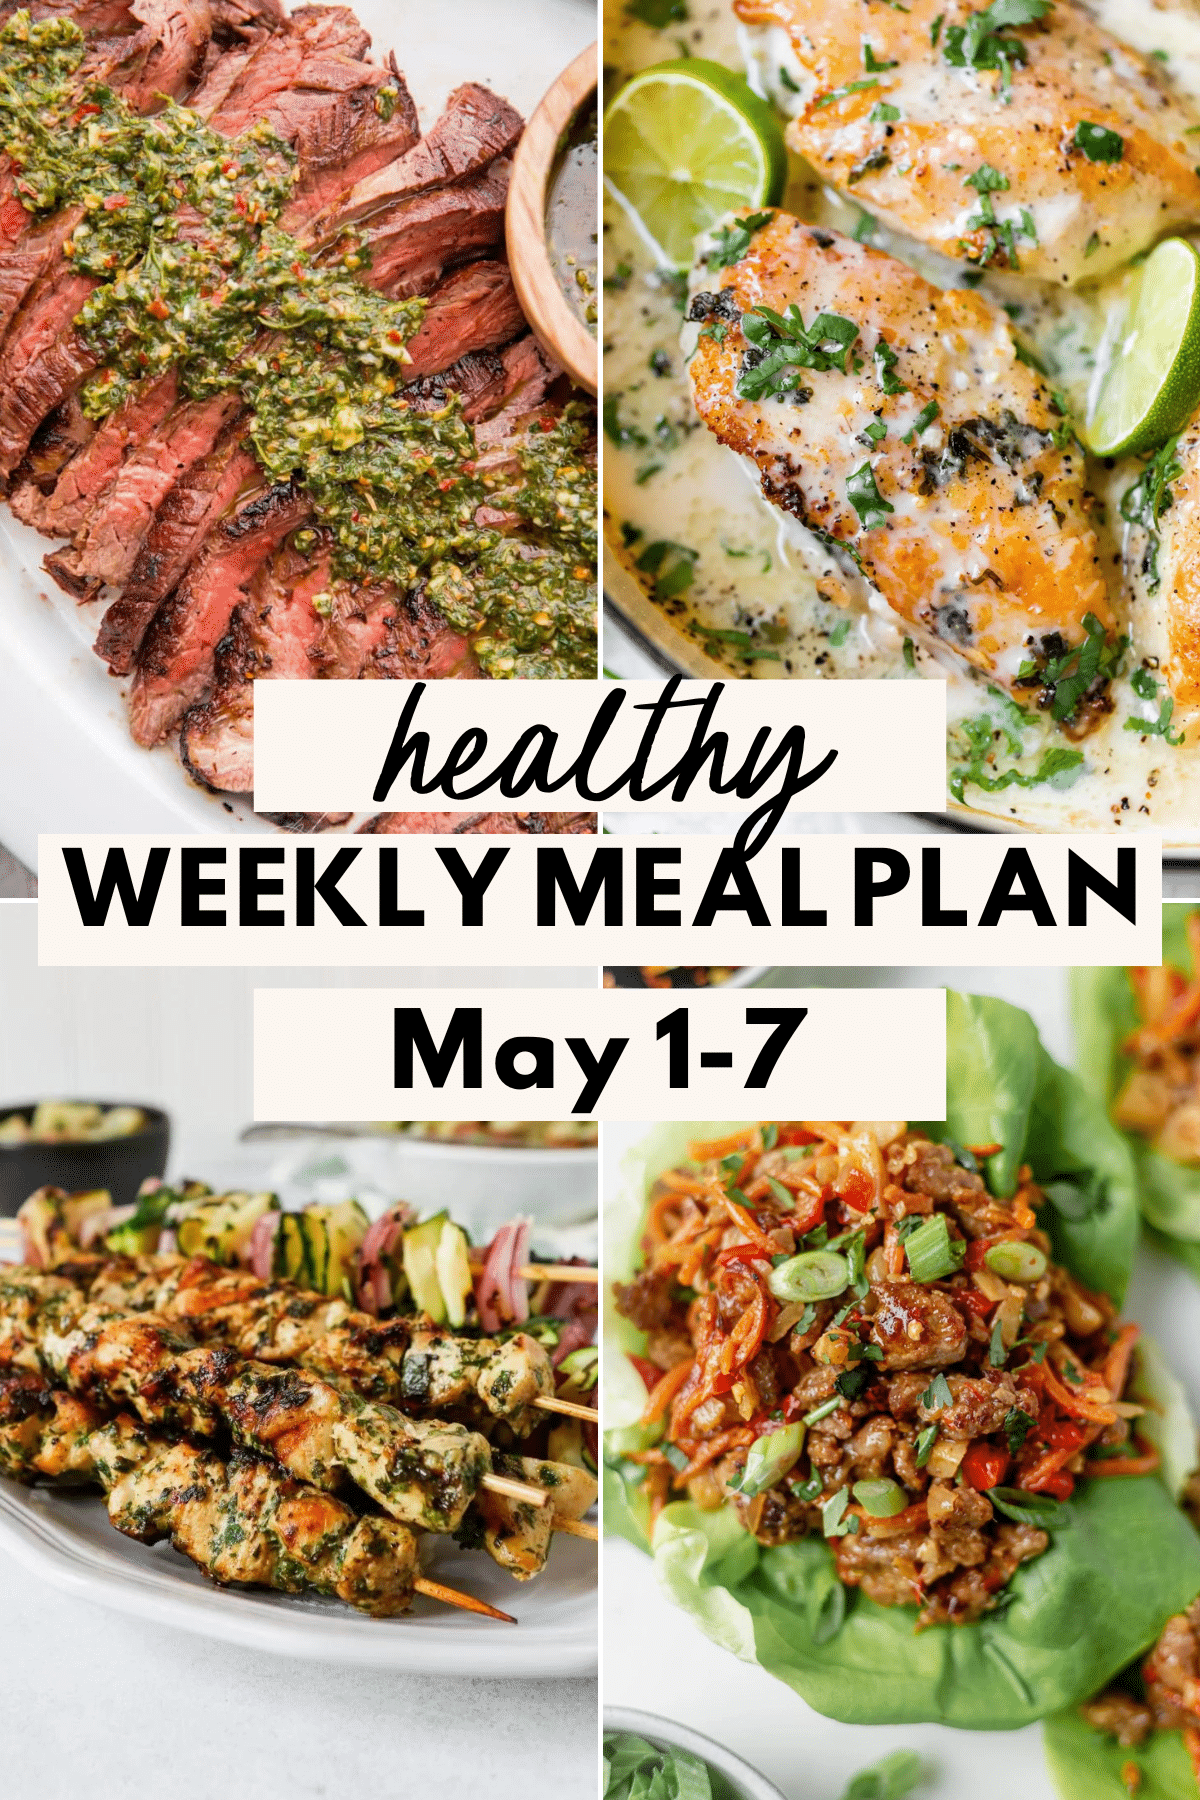 Collage of 4 healthy dinner recipes with text for Pinterest for the Healthy Weekly Meal Plan for May 1-7